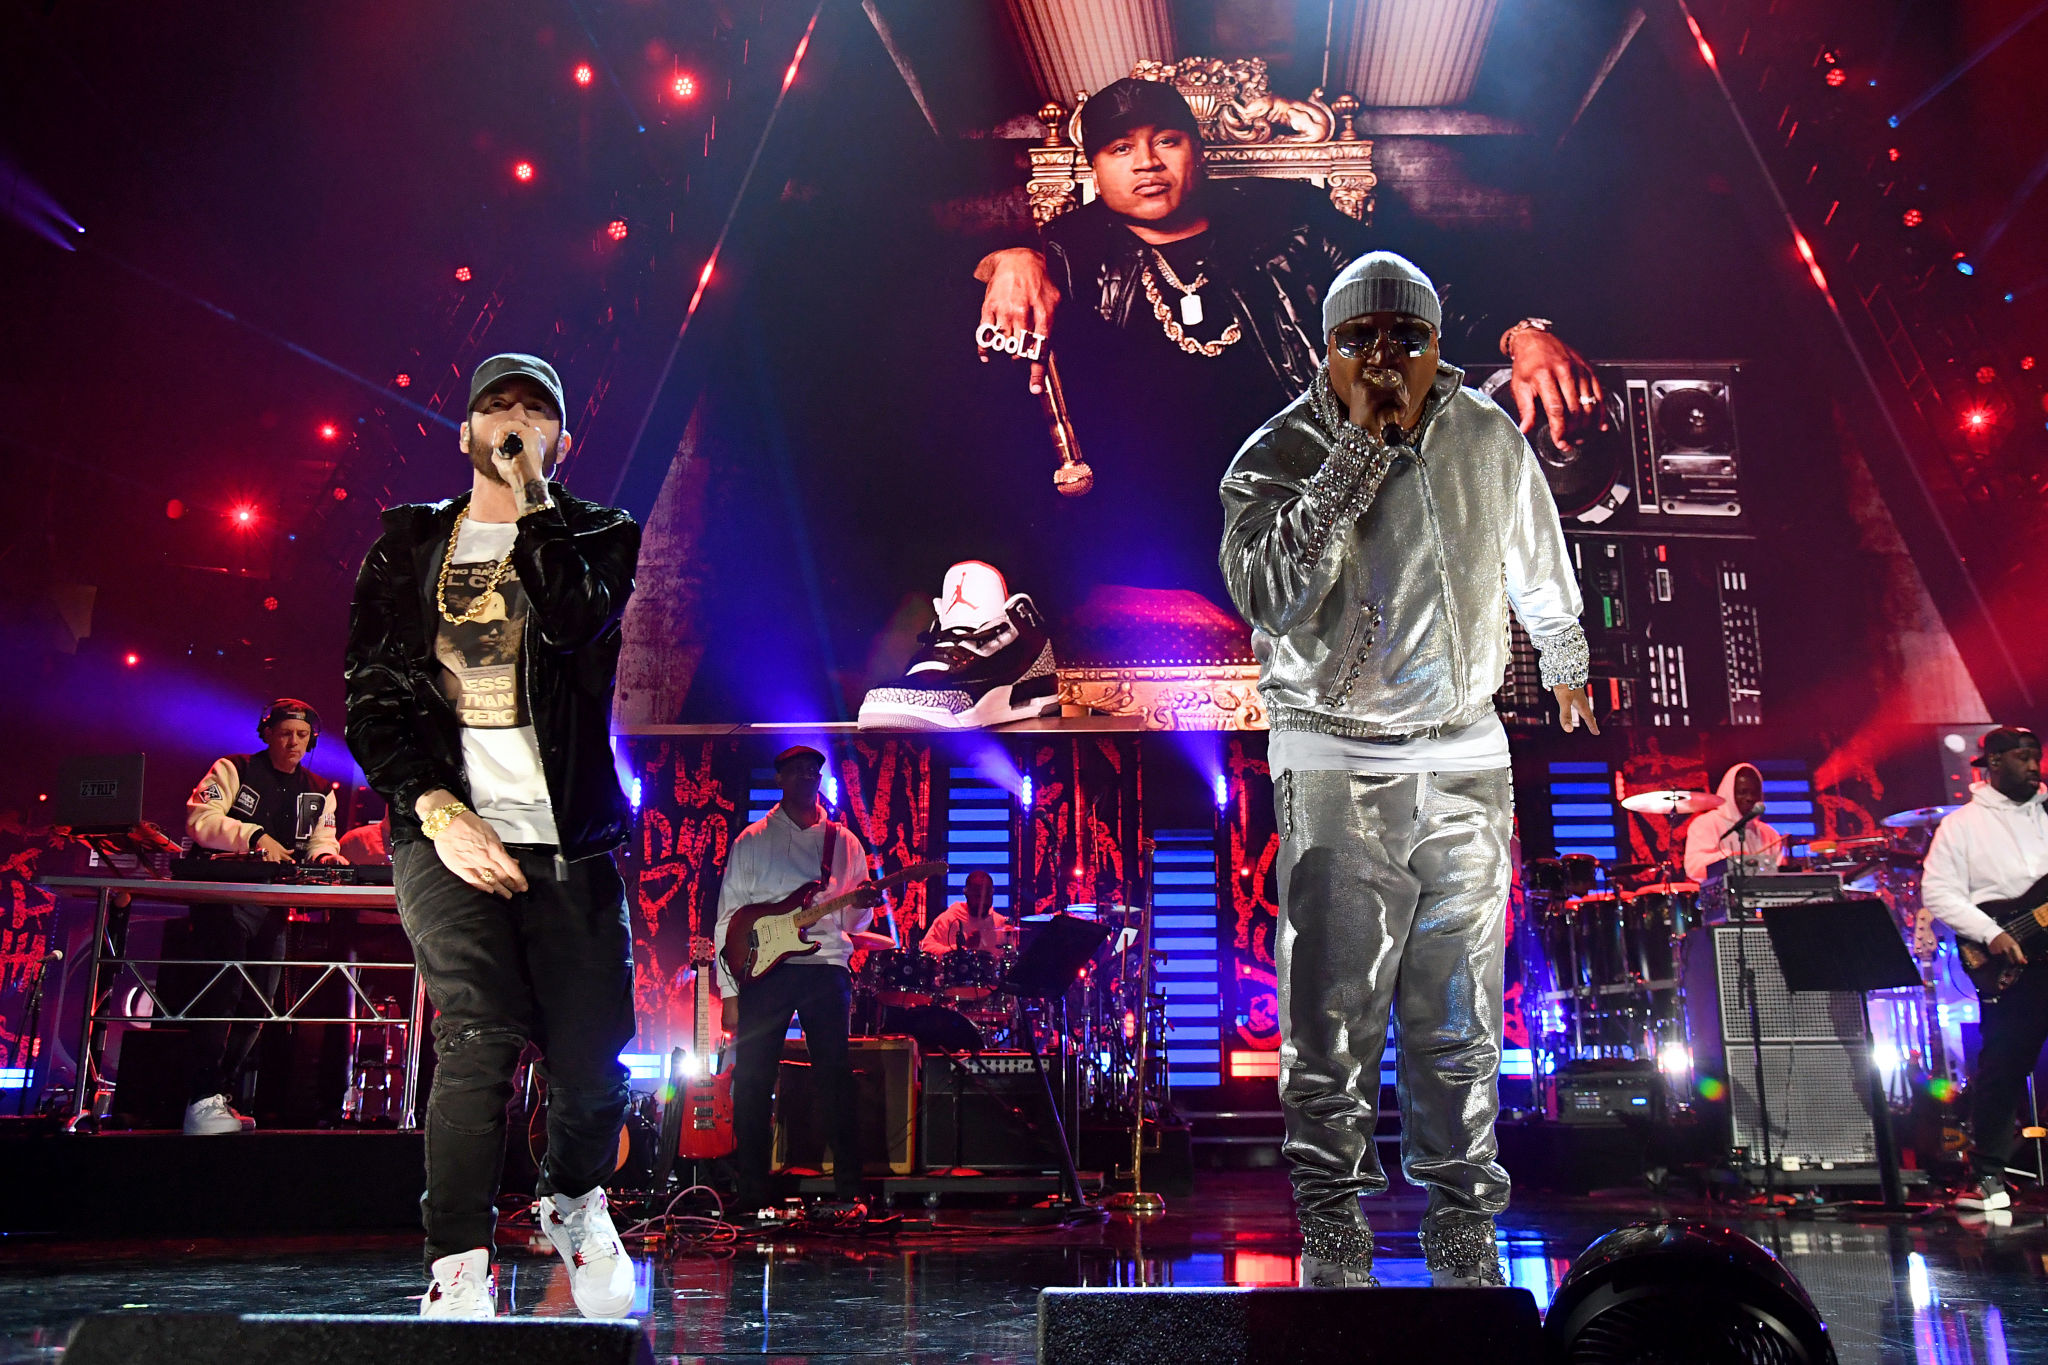 CLEVELAND, OHIO - OCTOBER 30: Eminem and LL Cool J perform onstage during the 36th Annual Rock & Roll Hall Of Fame Induction Ceremony at Rocket Mortgage Fieldhouse on October 30, 2021 in Cleveland, Ohio. (Photo by Kevin Mazur/Getty Images for The Rock and Roll Hall of Fame )